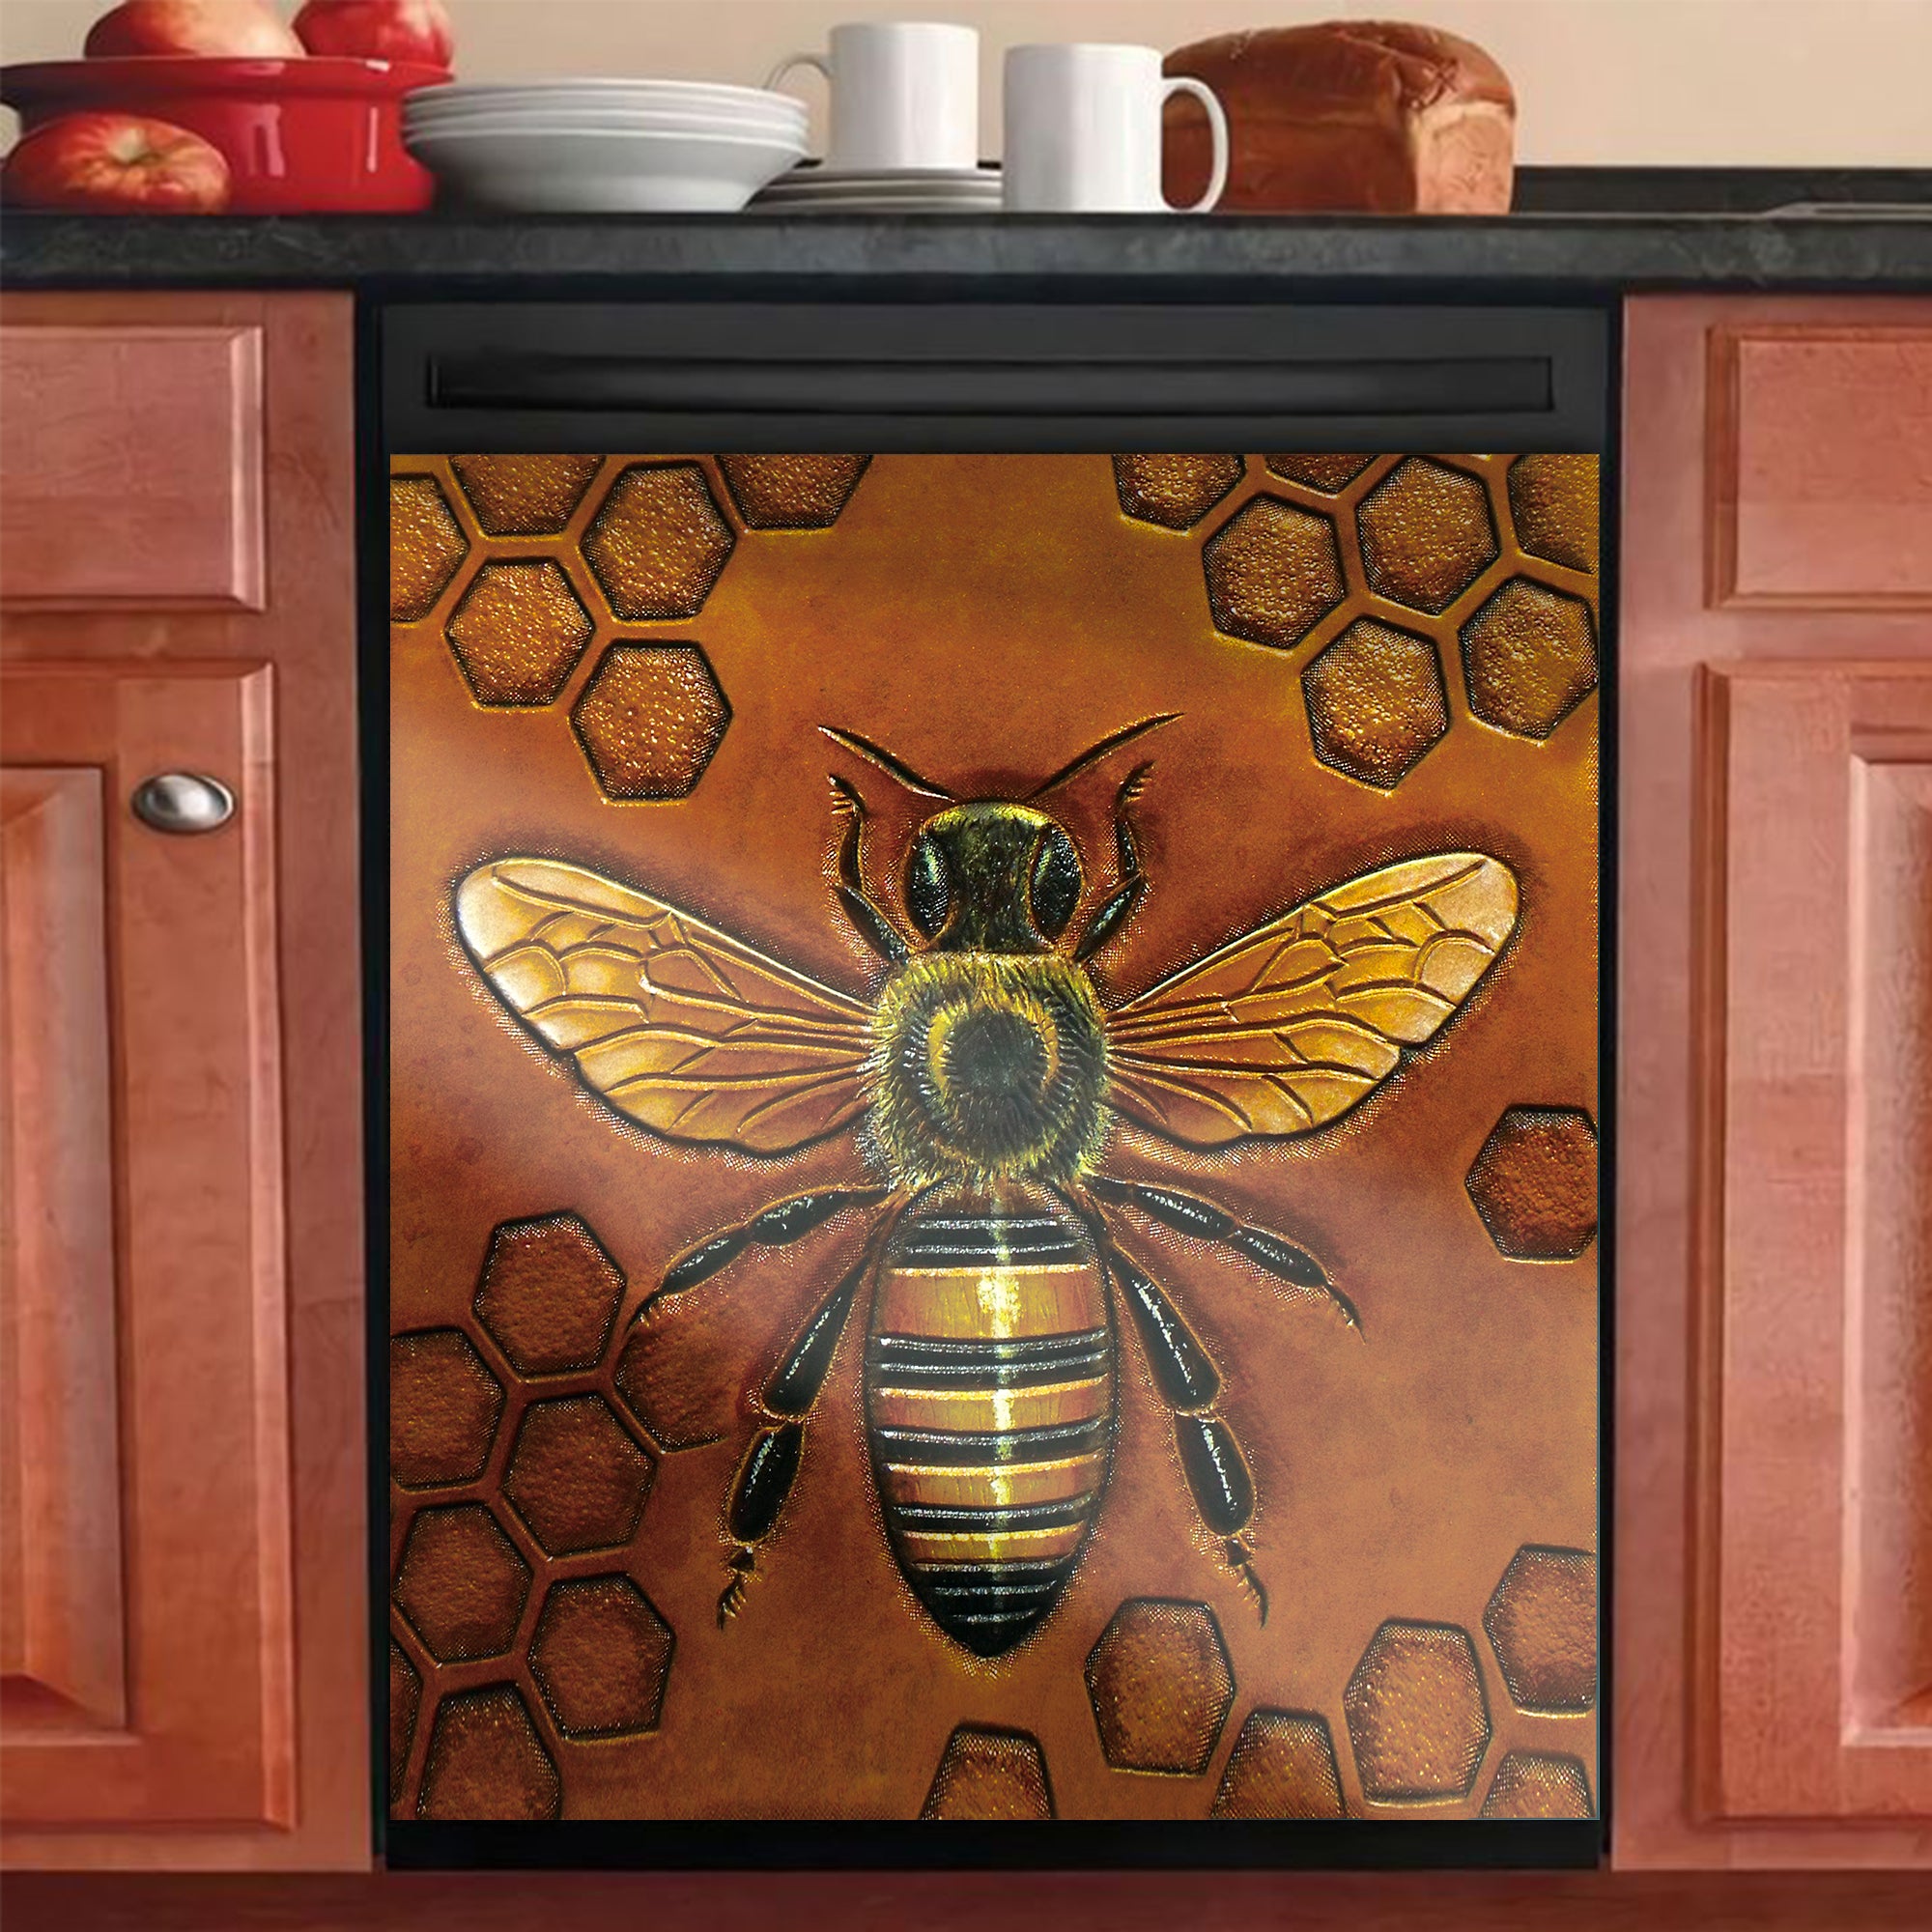 Queen Bee Dishwasher Cover 08037